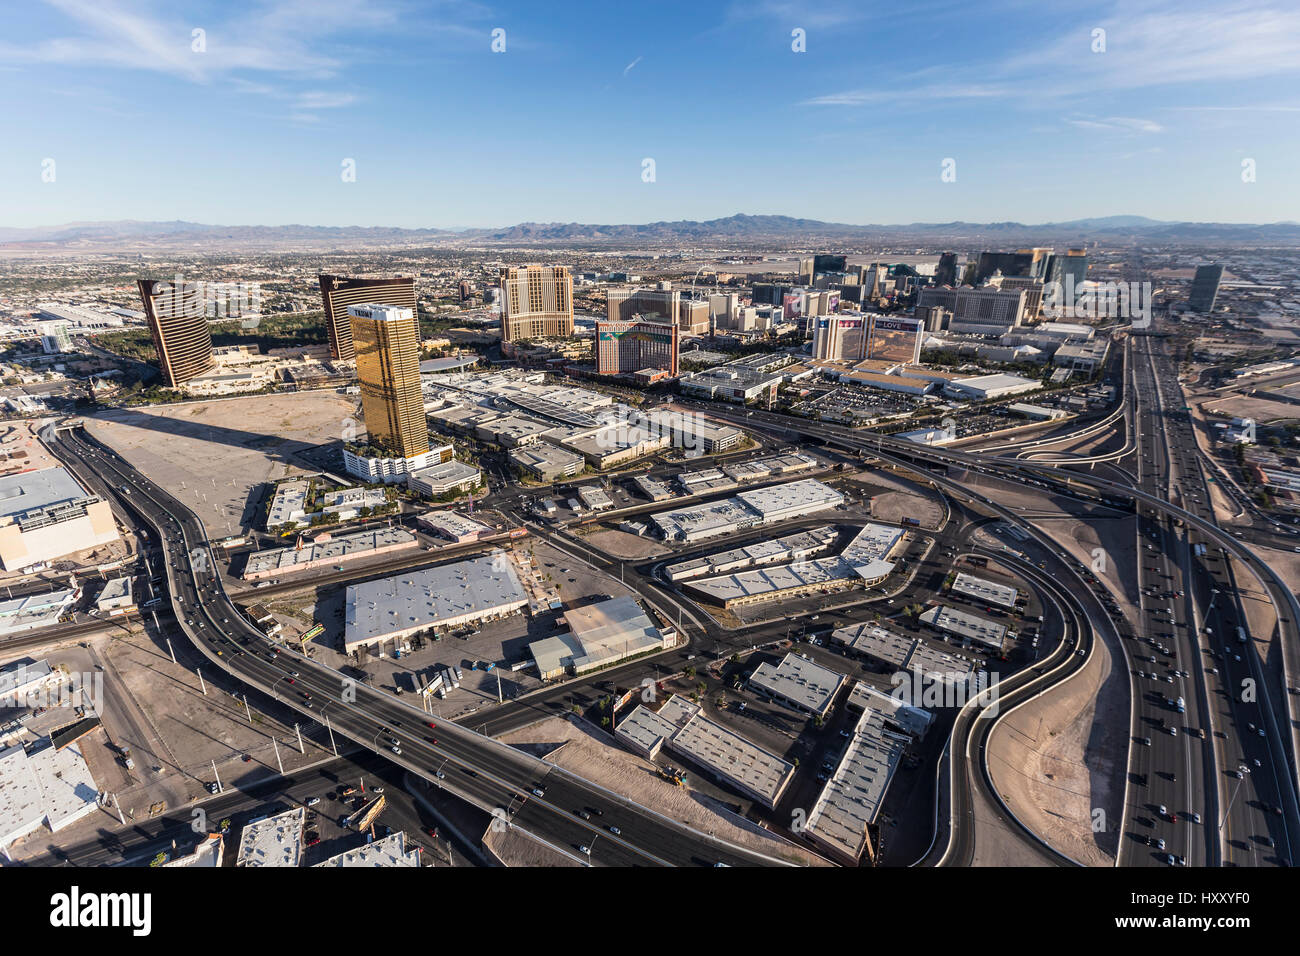 Las Vegas, Nevada, USA - March 13, 2017:  Aerial view of Las Vegas resorts, roads and interstate 15. Stock Photo